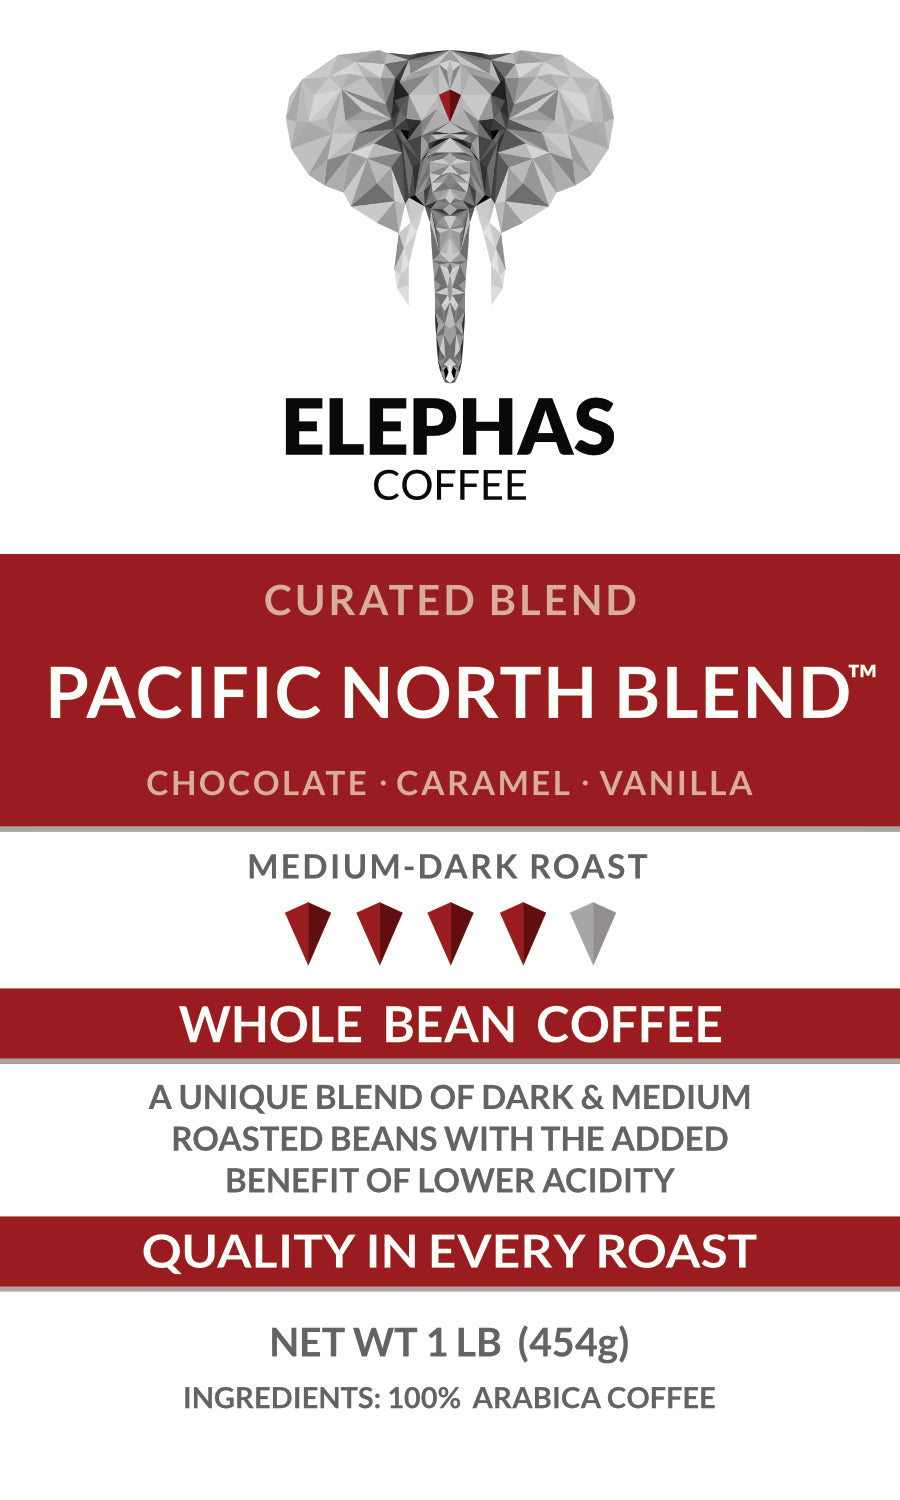 Pacific North Blend from Elephas Coffee